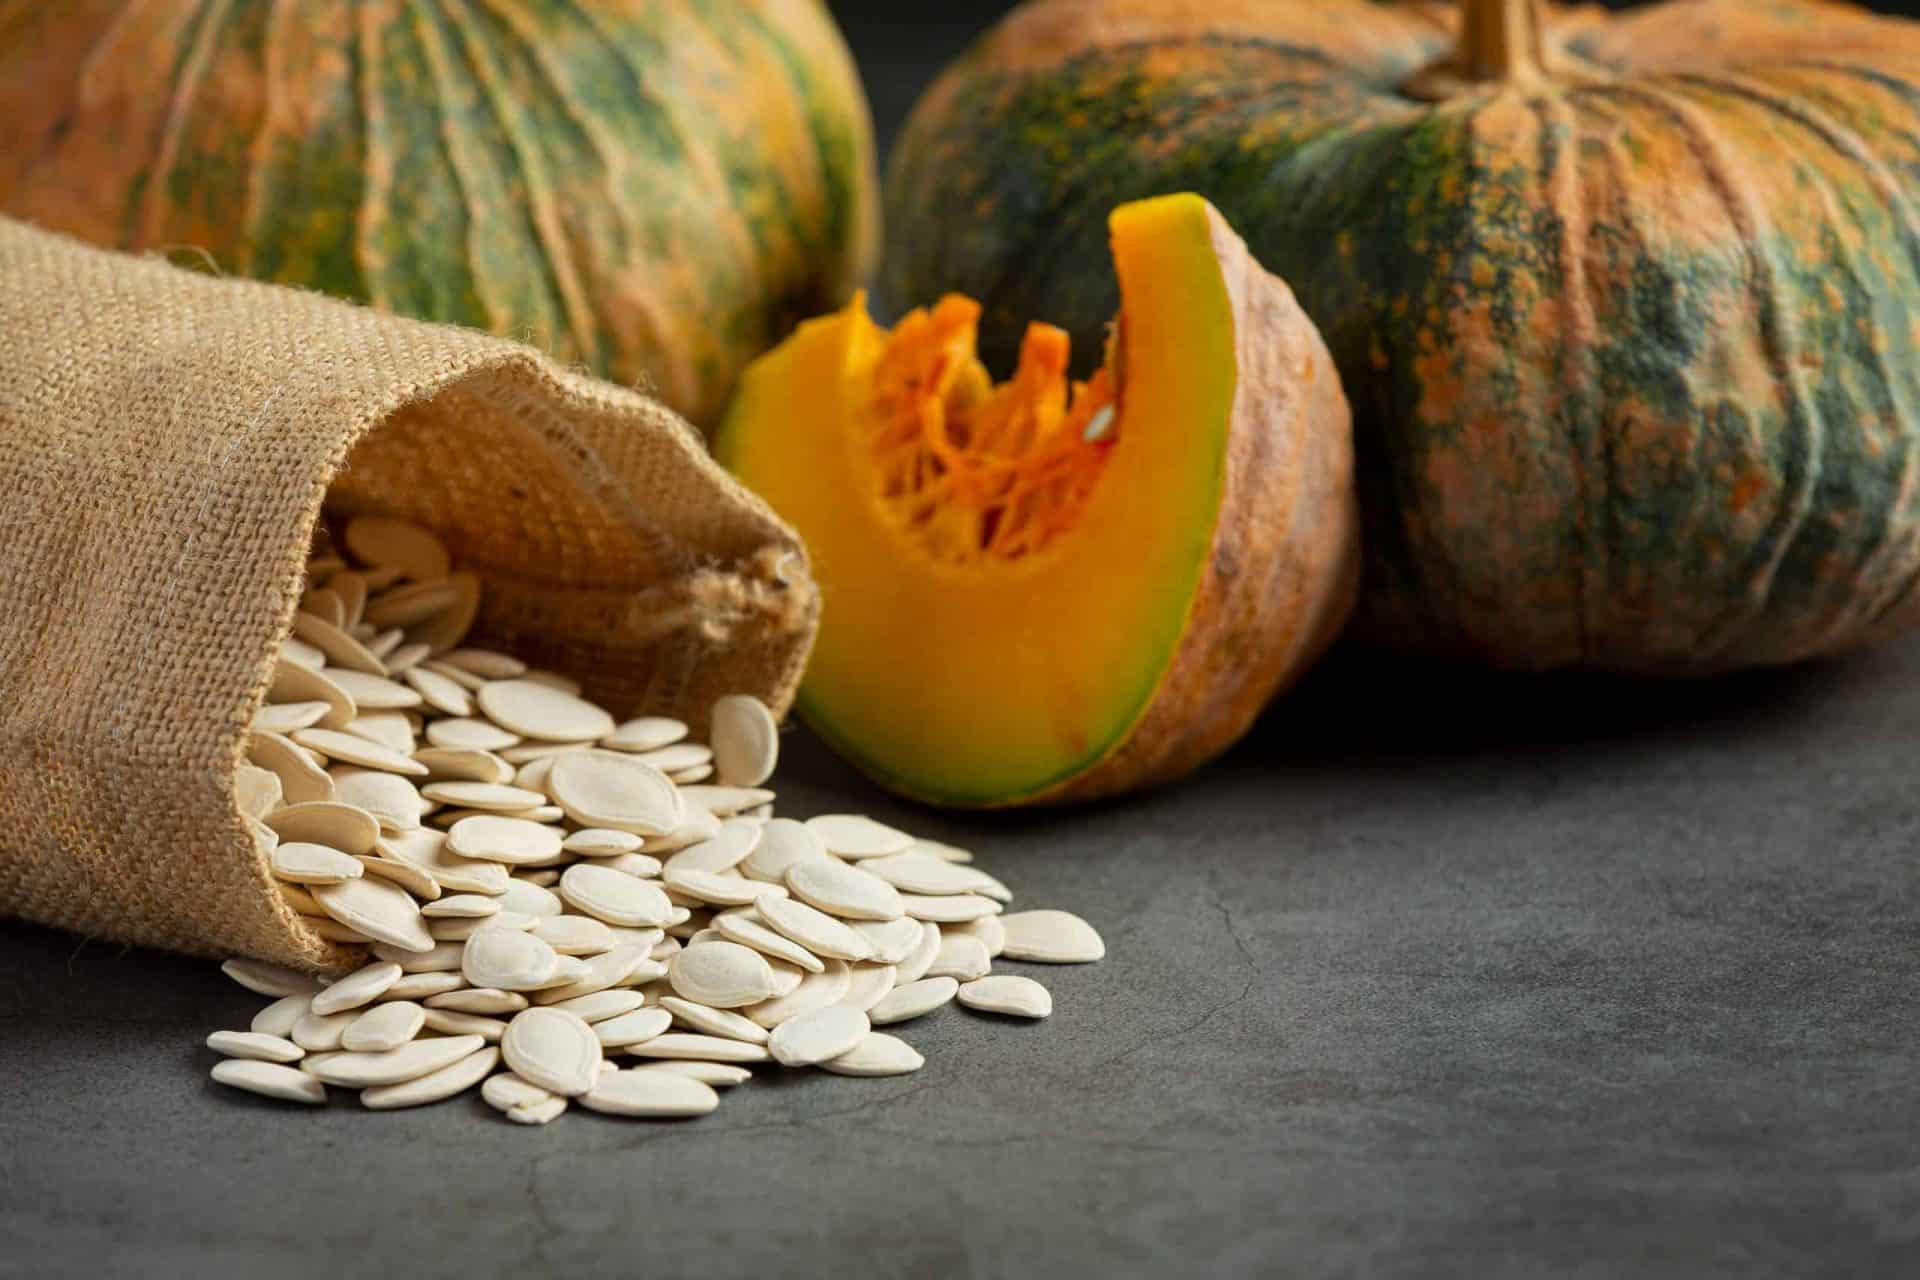 How To Save Seeds From Squash For Planting